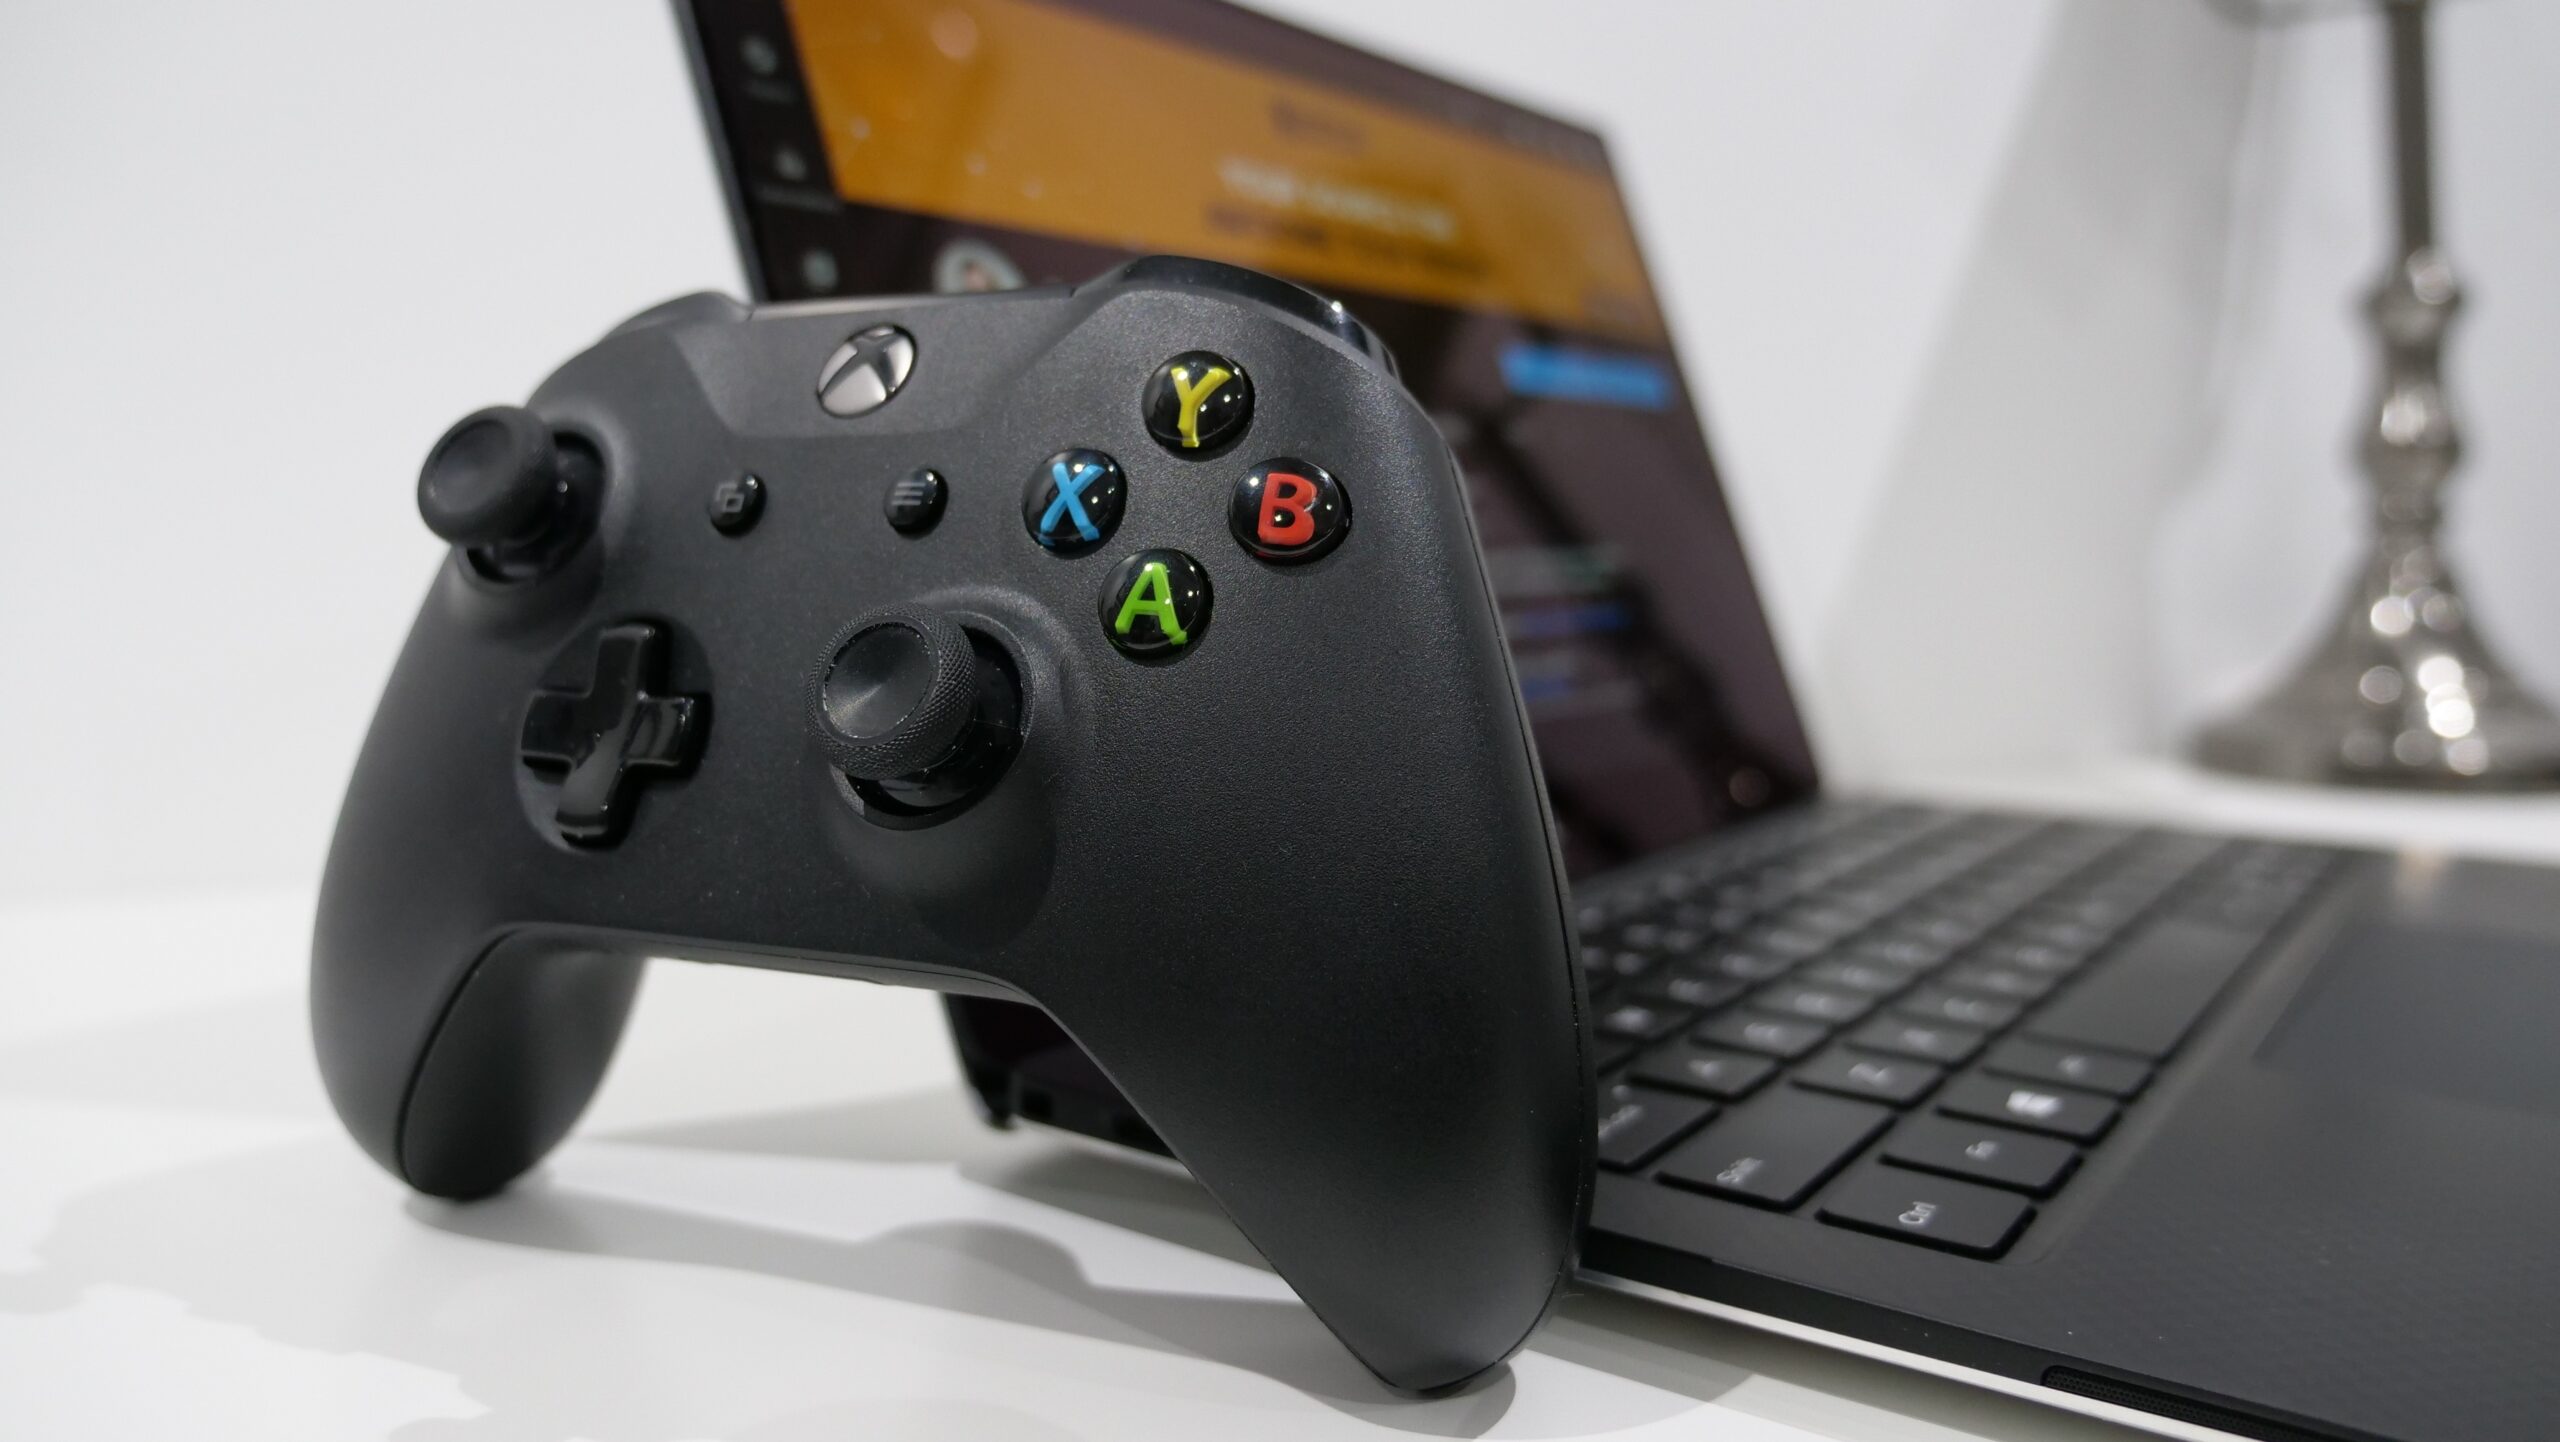 Costume Connect Xbox One To Tv With Usb for Streaming